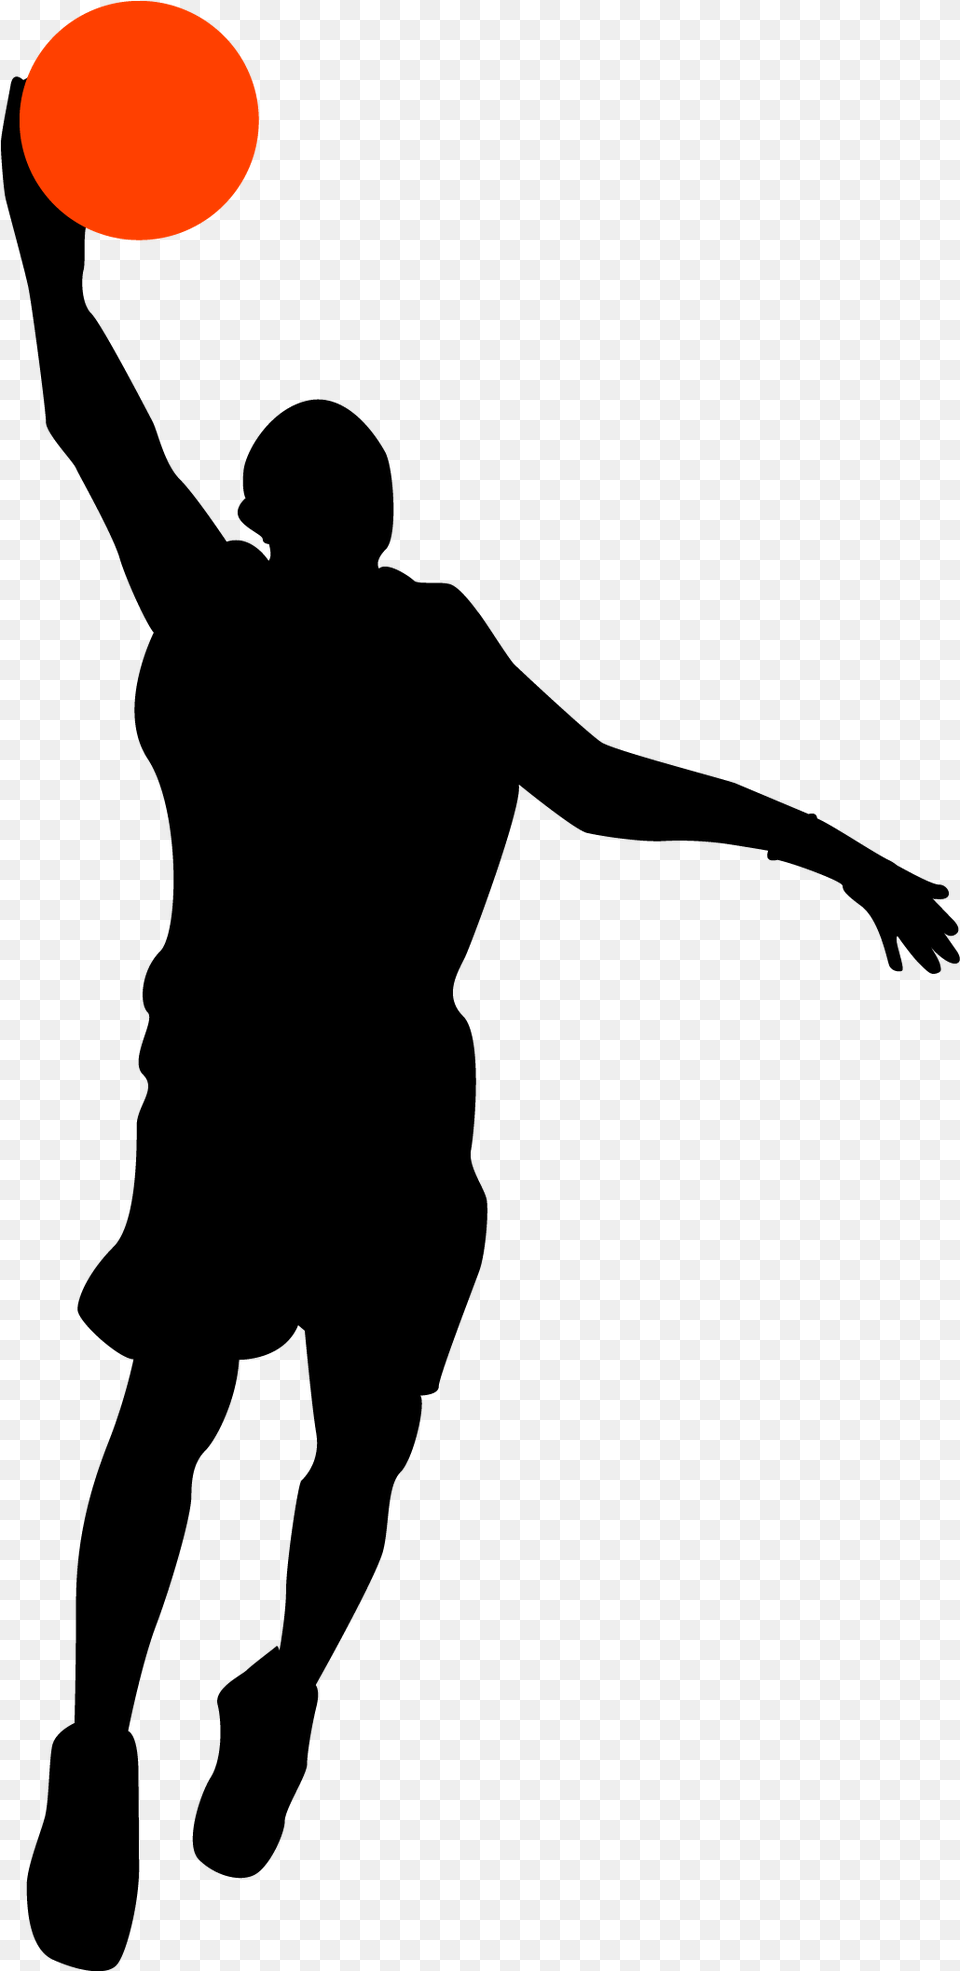 Basketball Player Sport Athlete Sticker Handsome Shot Man Basketball Player Layup Silhouette, Lighting, Astronomy, Moon, Nature Free Transparent Png